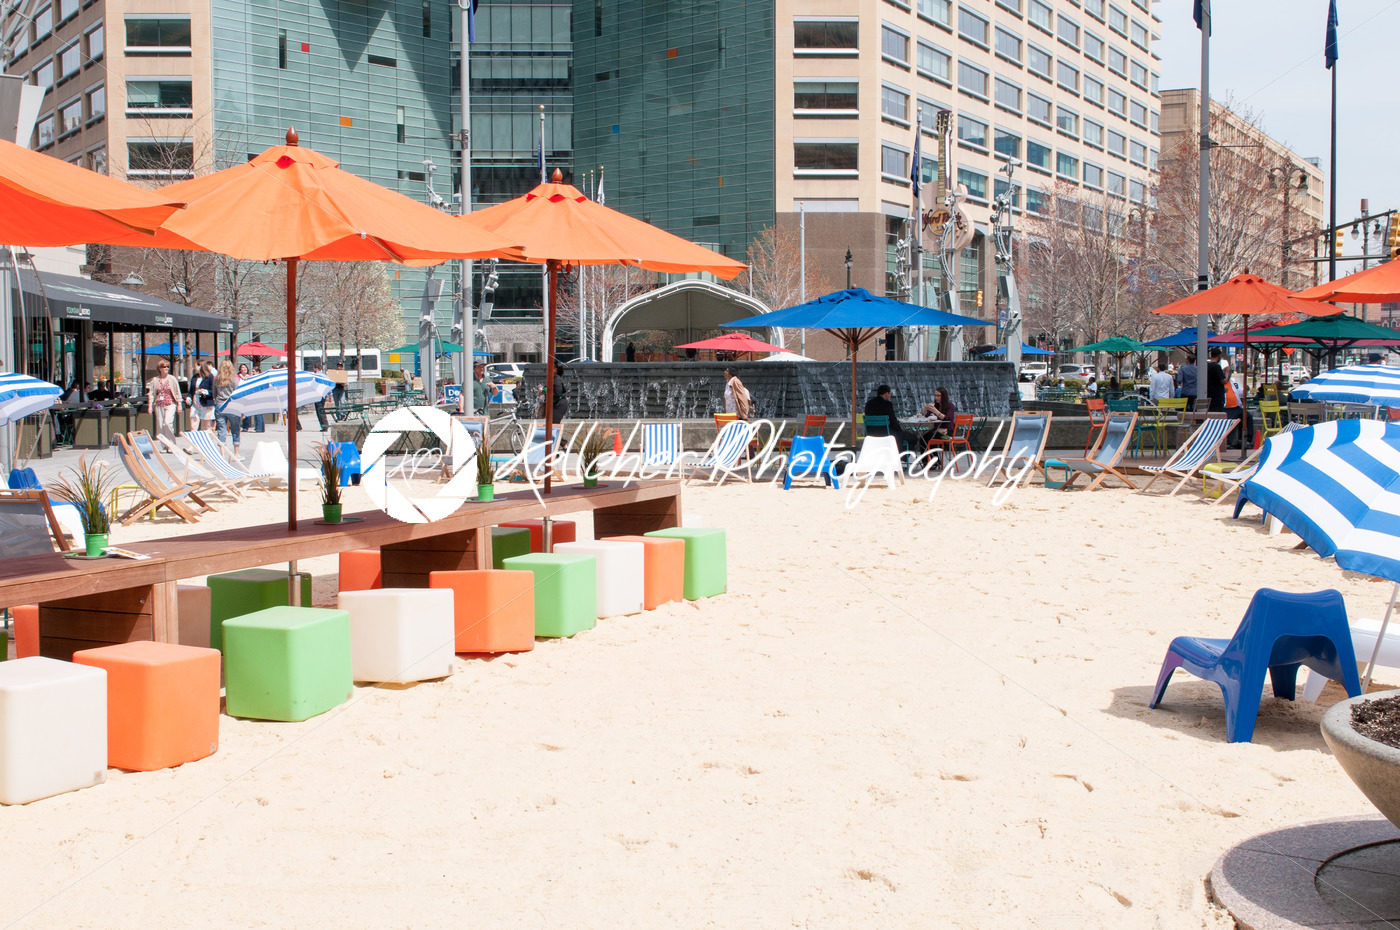 DETROIT, MI – MAY 8: People enjoying the revitalized Campus Martius park in Detroit, MI on May 8, 2014 - Kelleher Photography Store